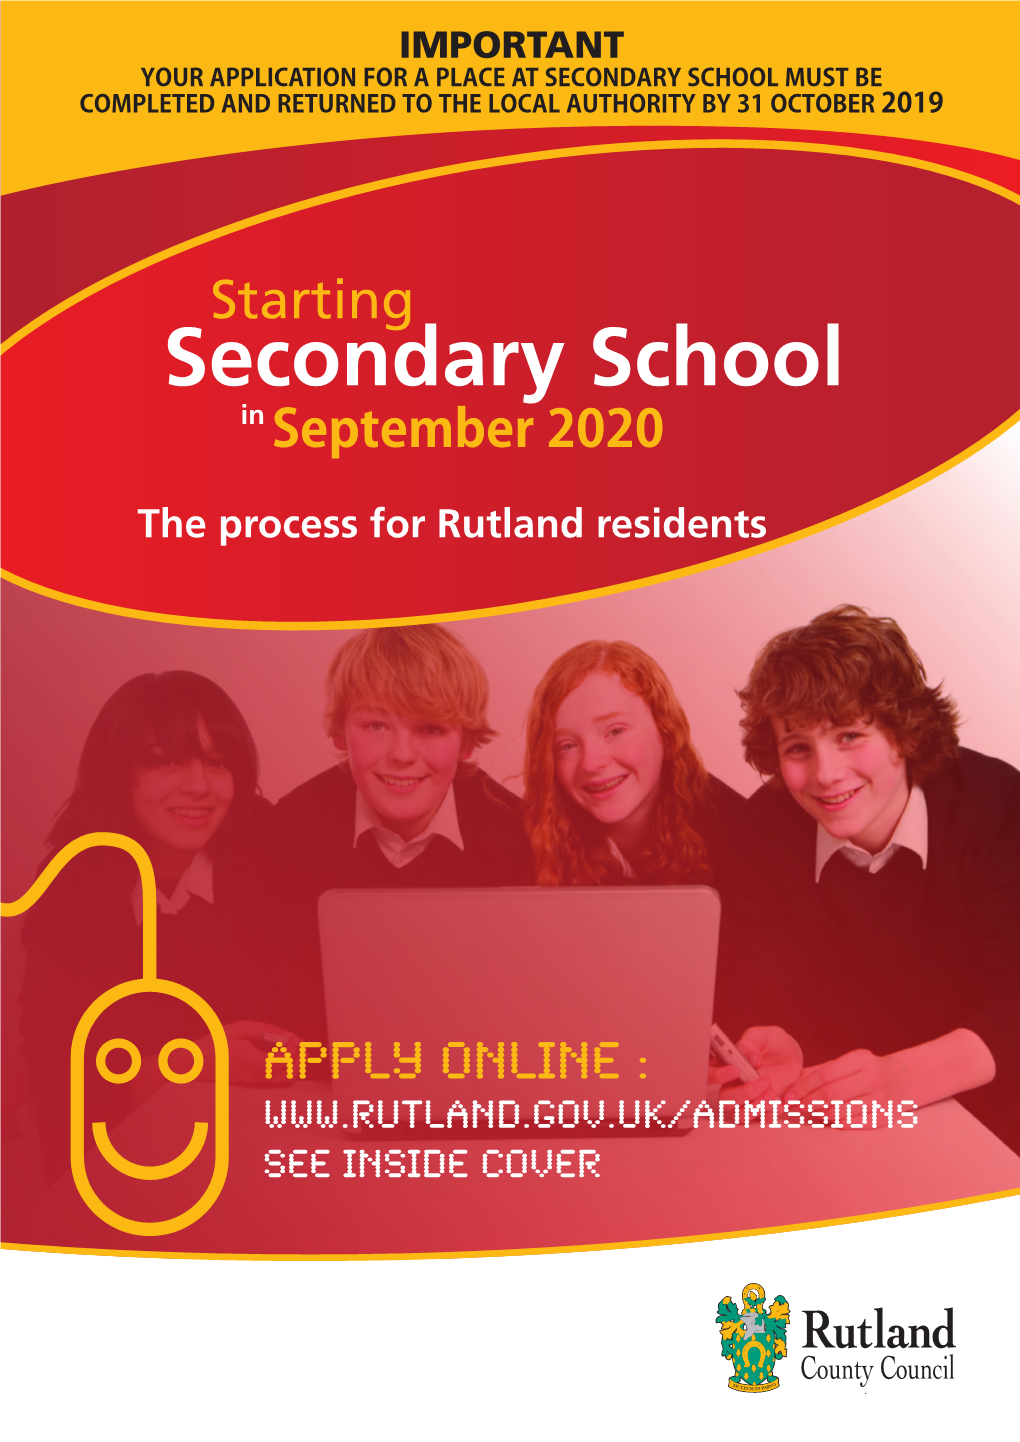 Secondary School Must Be Completed and Returned to the Local Authority by 31 October 2019